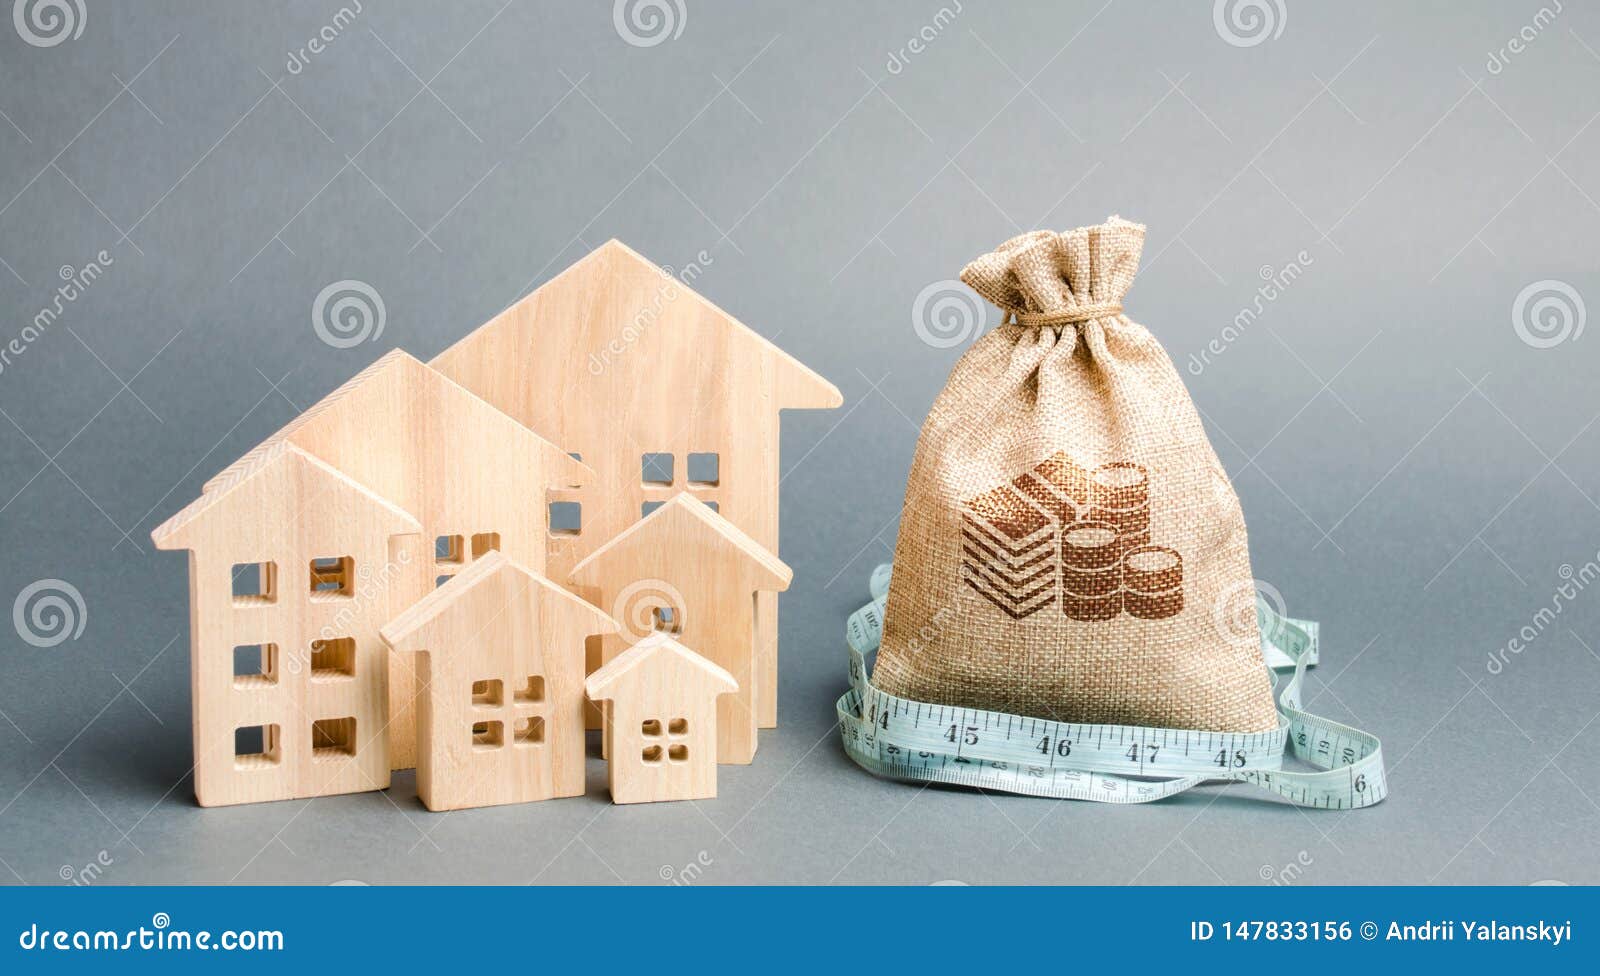 bag with money and tape measure with a wooden houses. the concept of a limited real estate budget. low subsidies. lack of